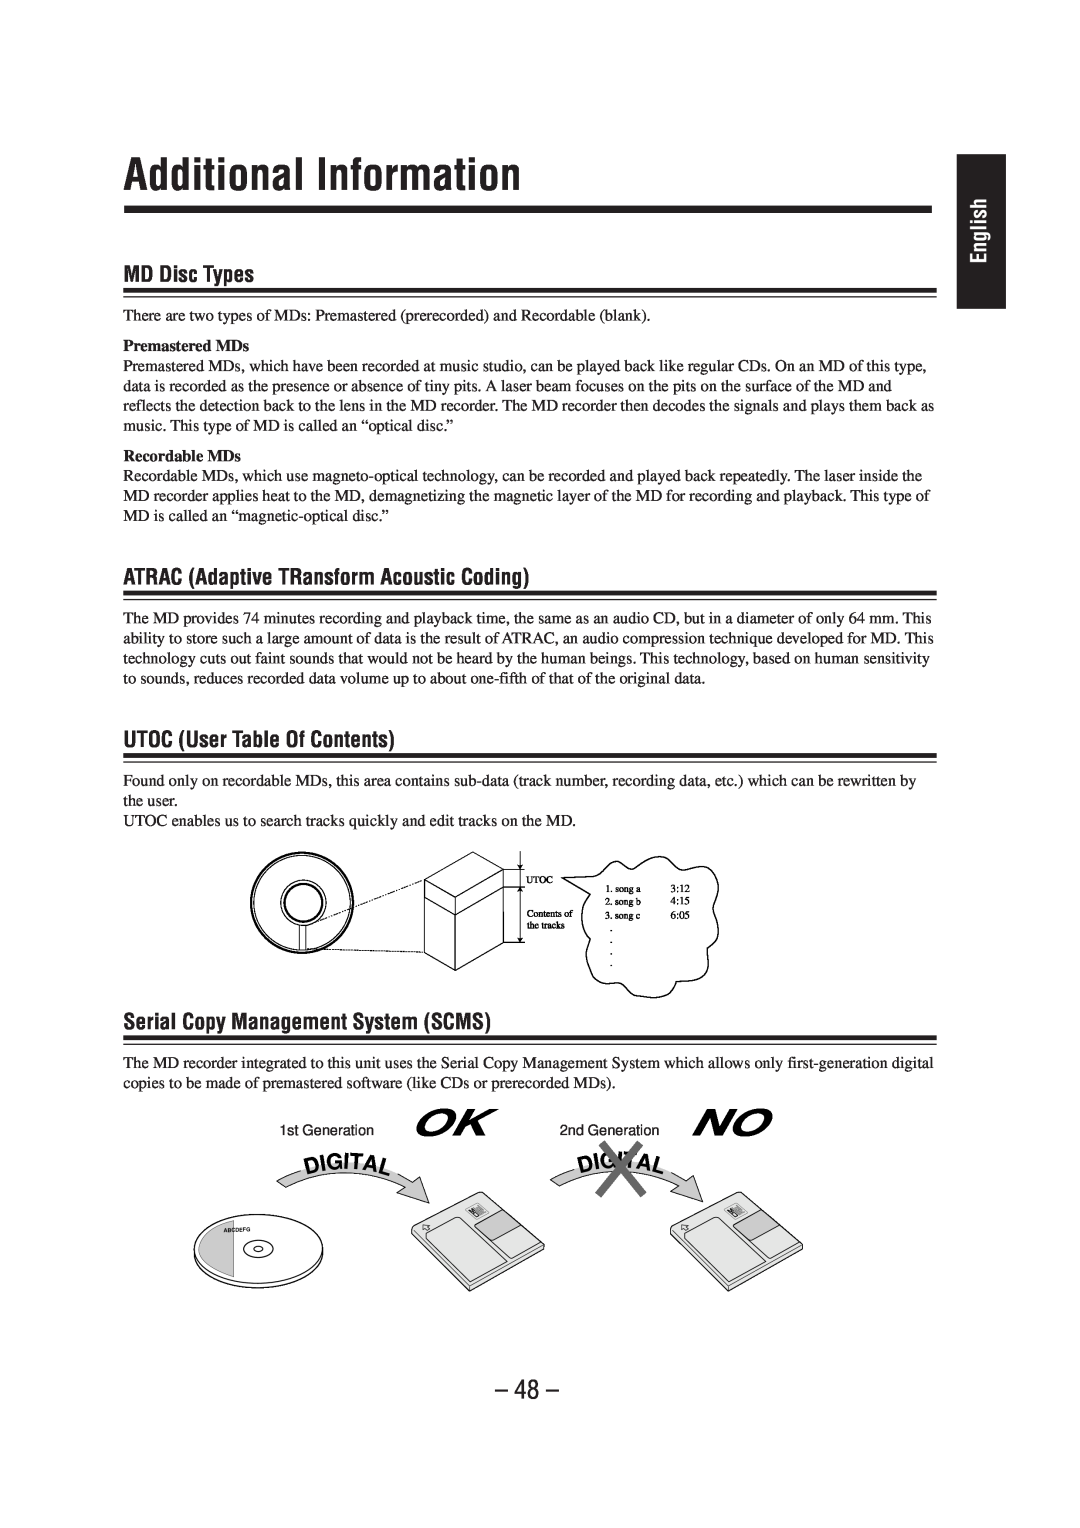 JVC CA-MD70R Additional Information, MD Disc Types, ATRAC Adaptive TRansform Acoustic Coding, UTOC User Table Of Contents 